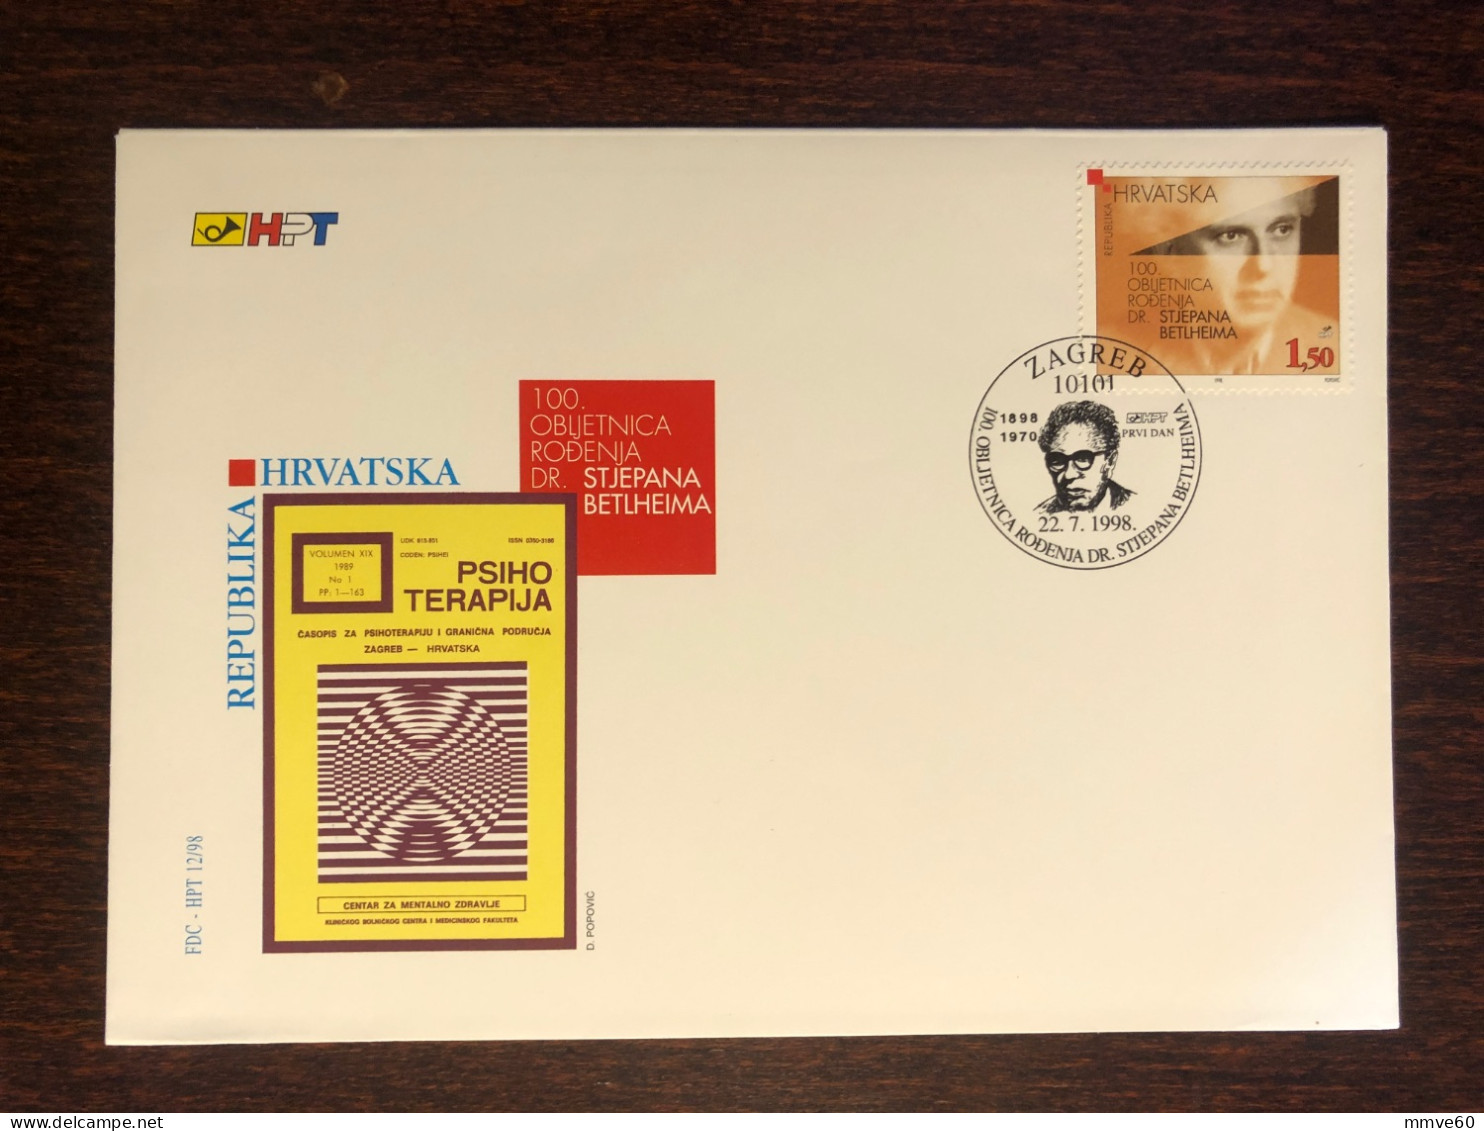 CROATIA FDC COVER 1998 YEAR PSYCHIATRY PSYCHOTHERAPY HEALTH MEDICINE STAMPS - Croacia